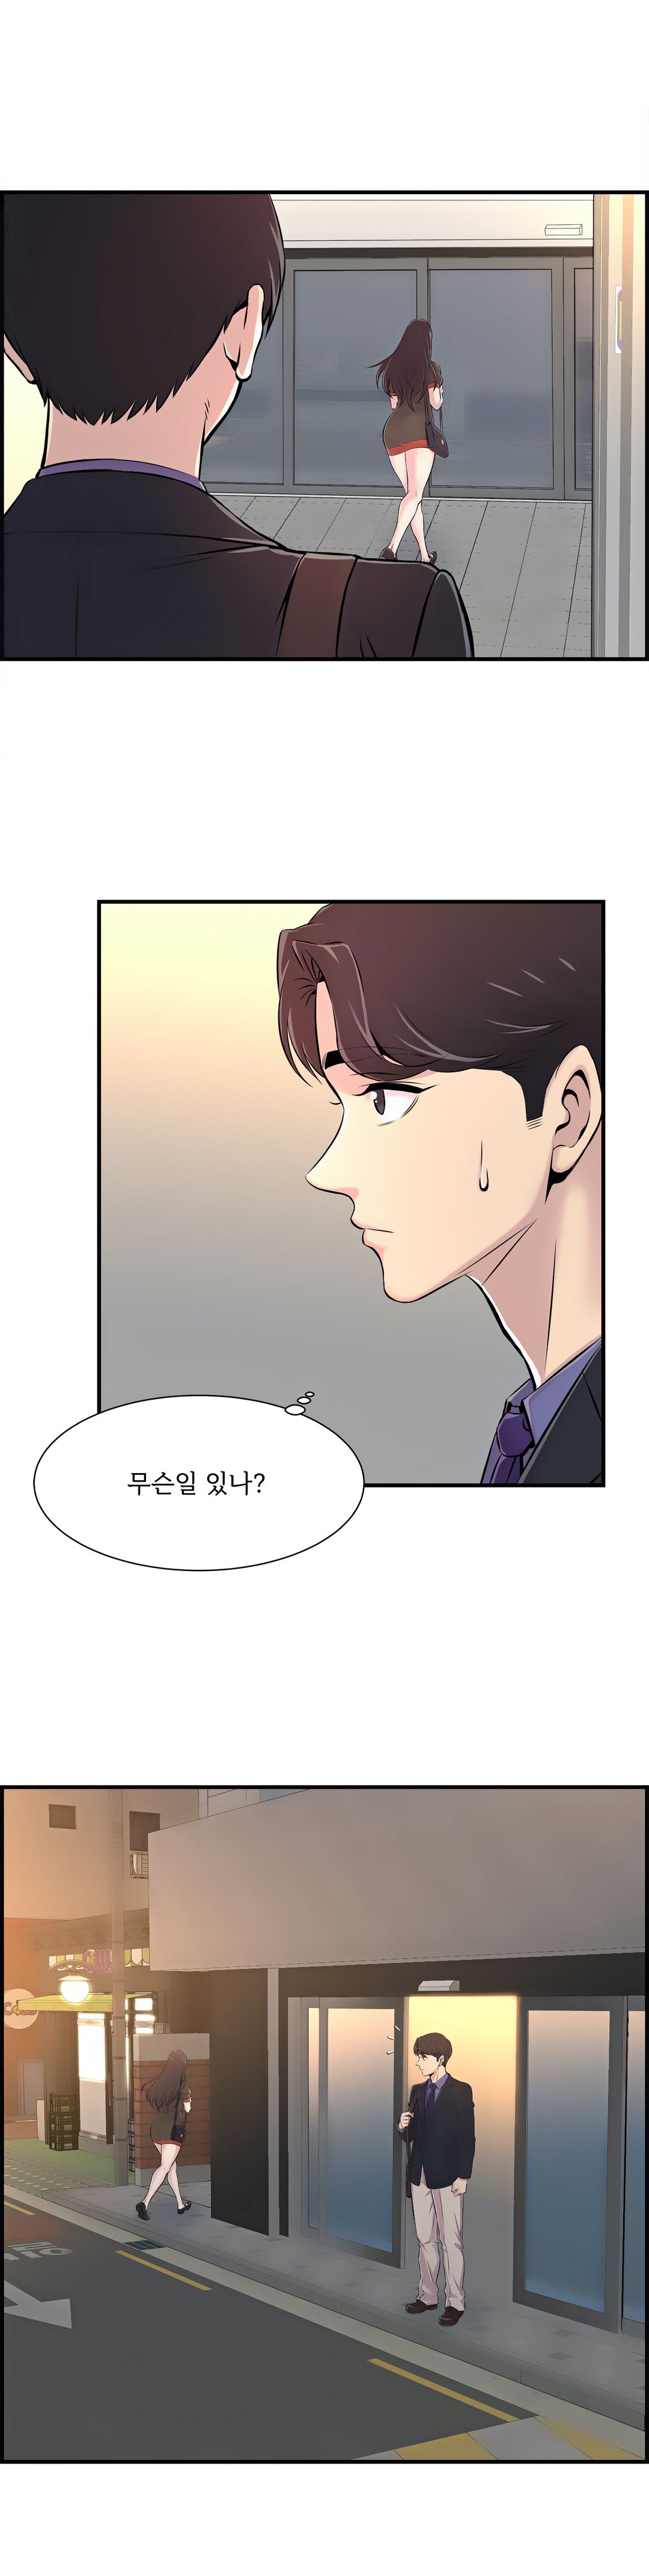 Cram School Scandal Raw - Chapter 6 Page 6